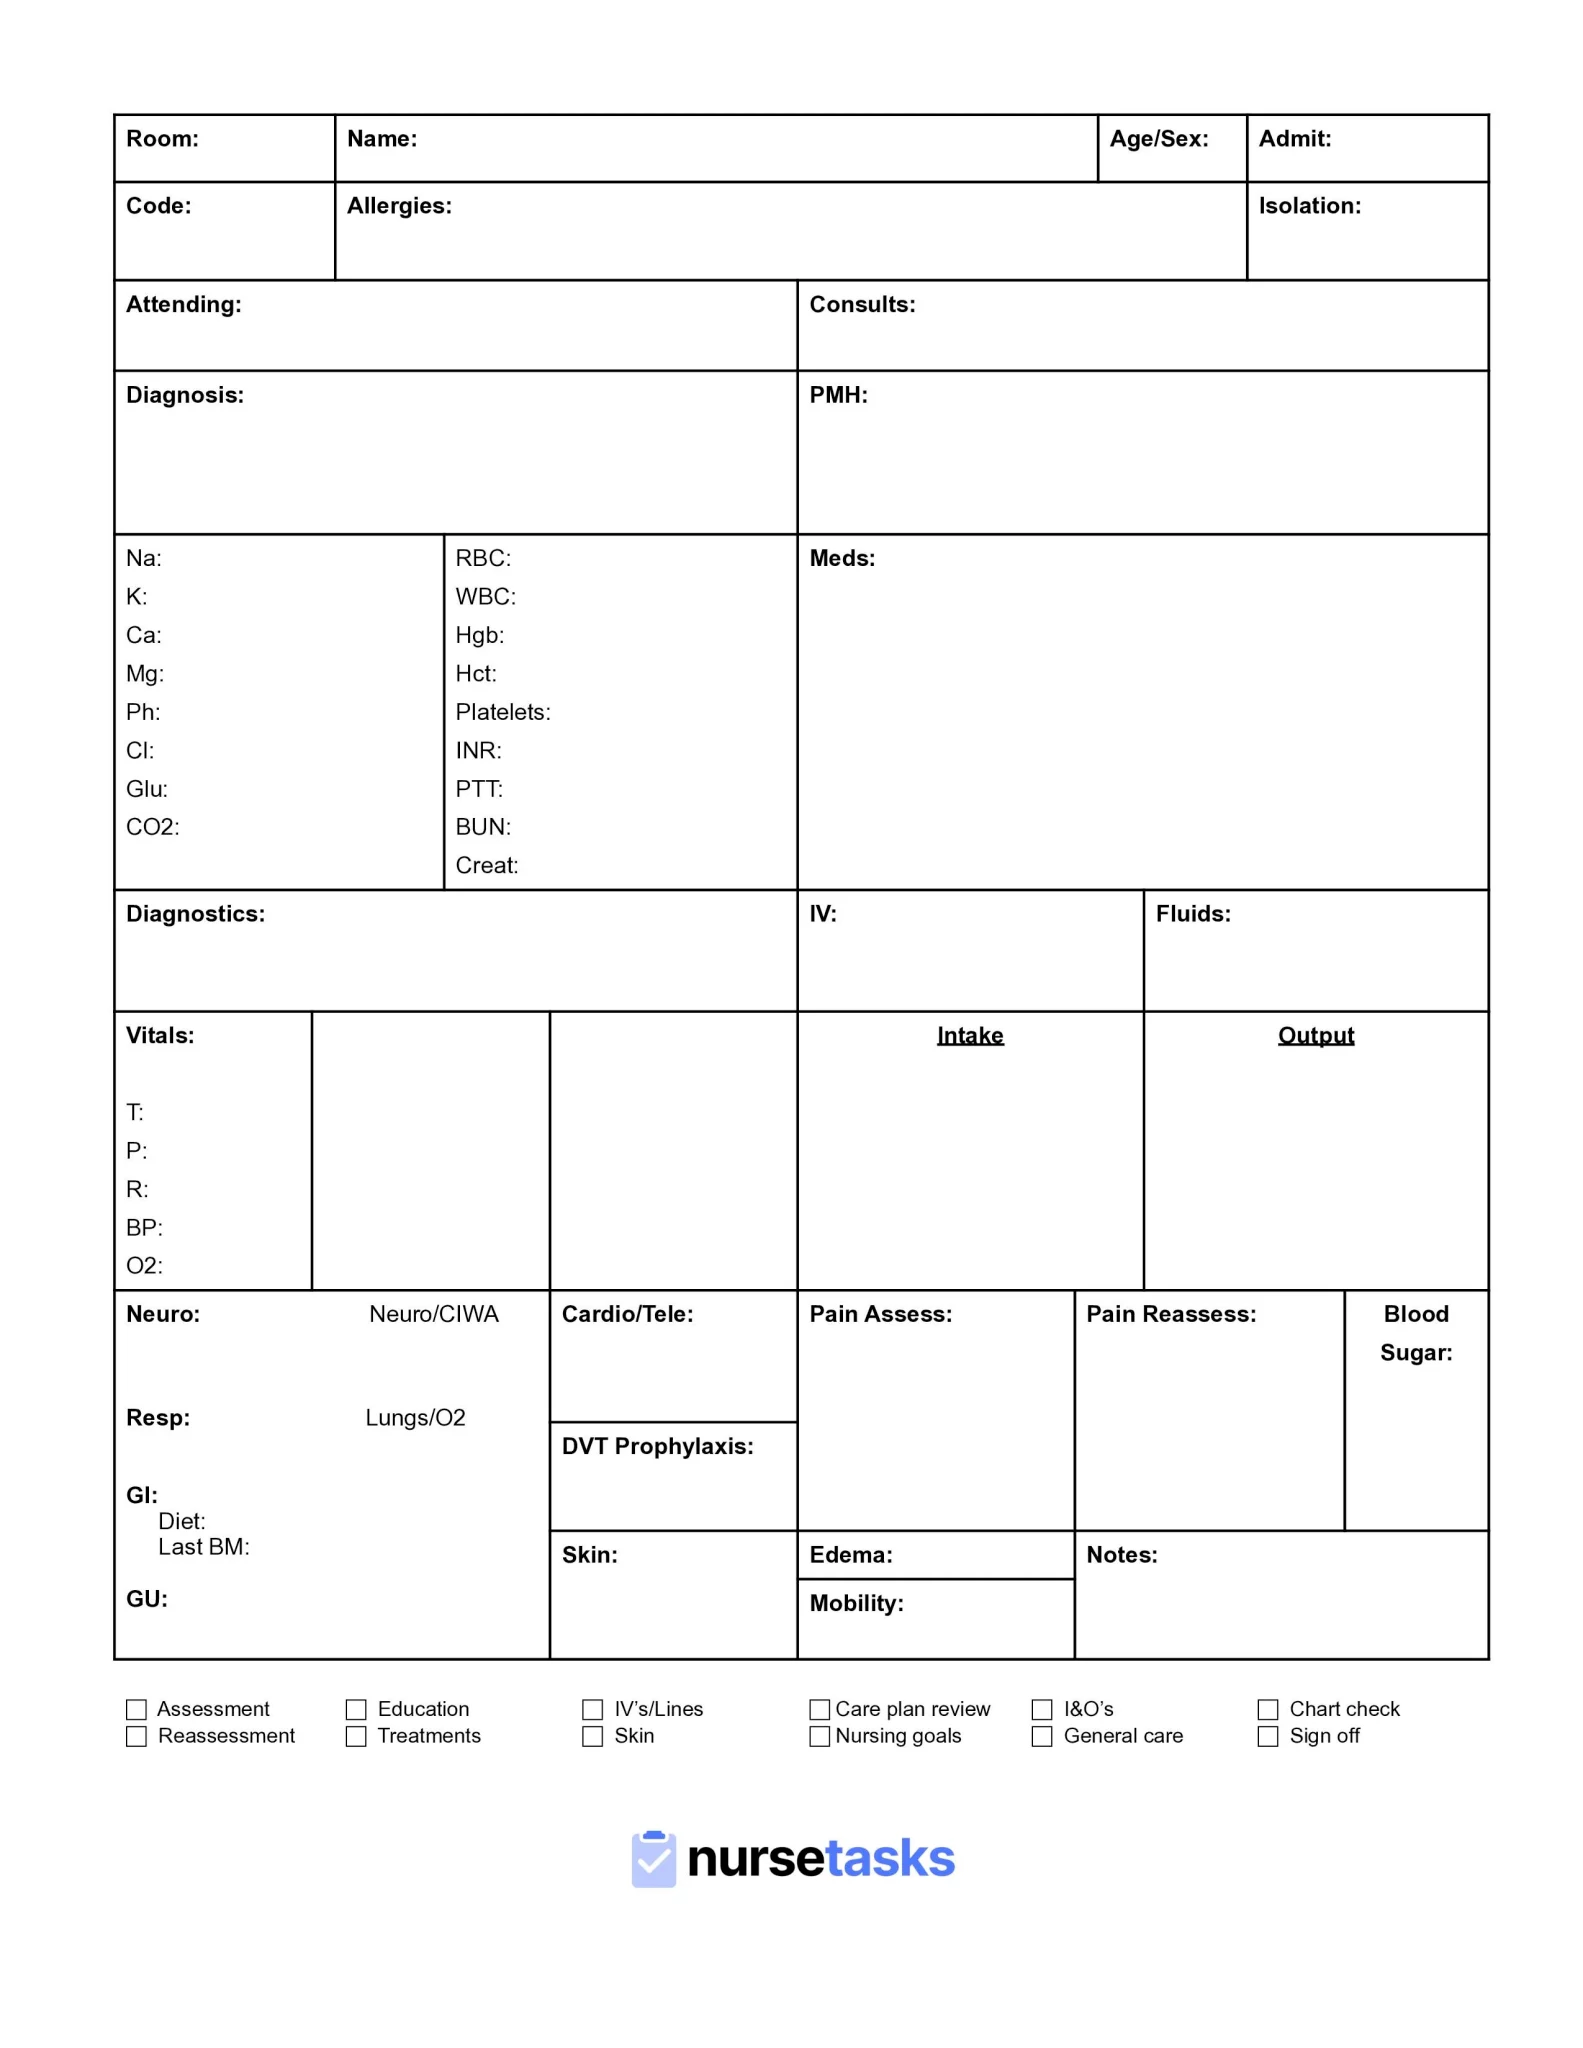 The Ultimate Nursing Report Sheet Guide - Free Downloads!